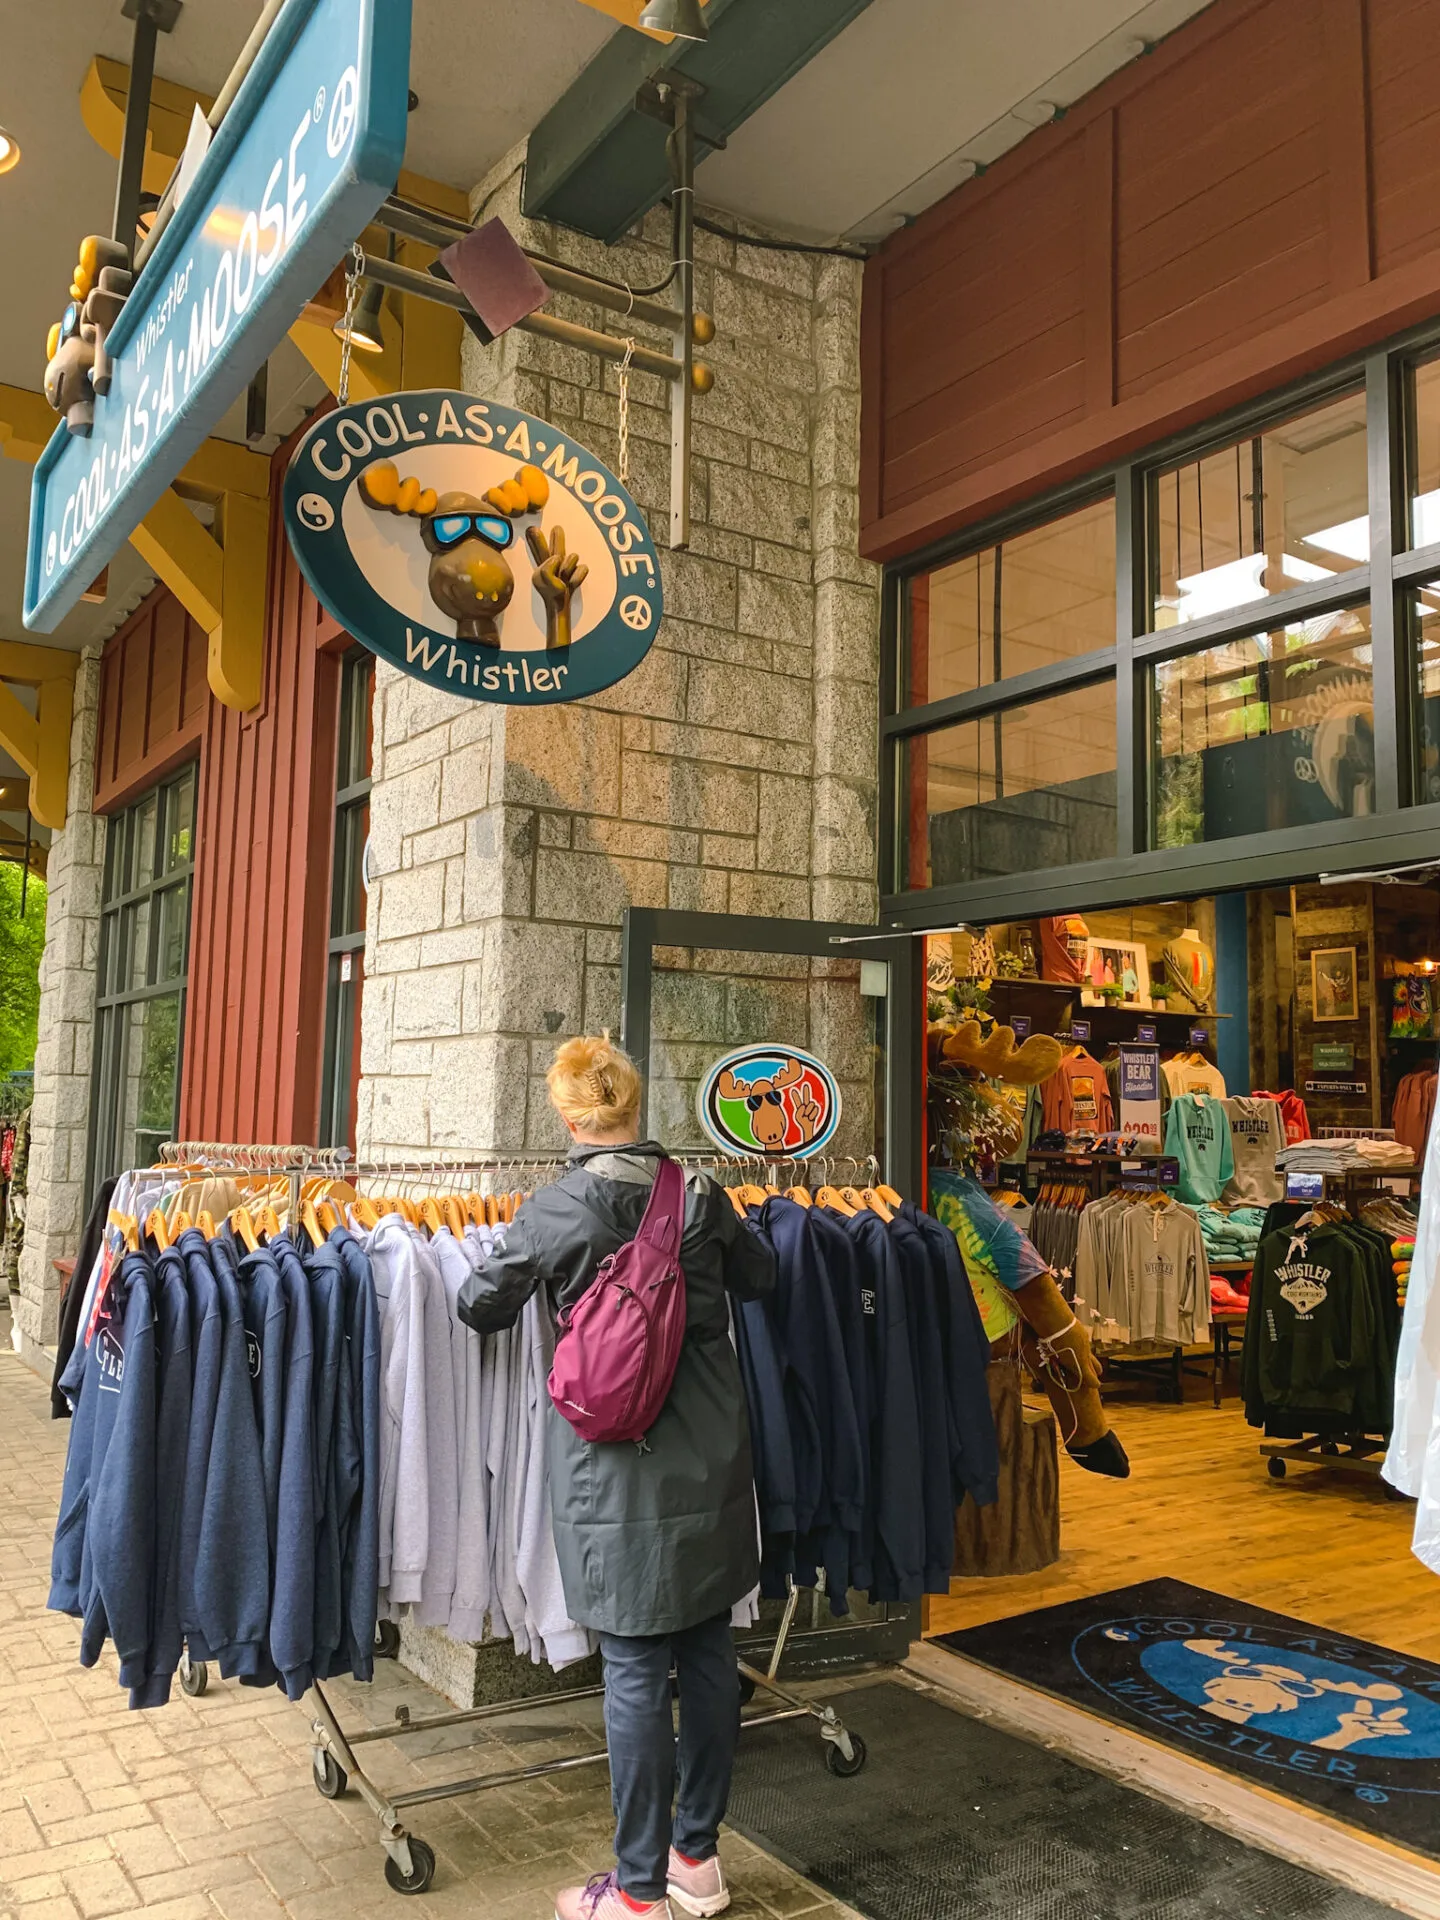 Cool As A Moose souvenir store in Whistler, British Columbia